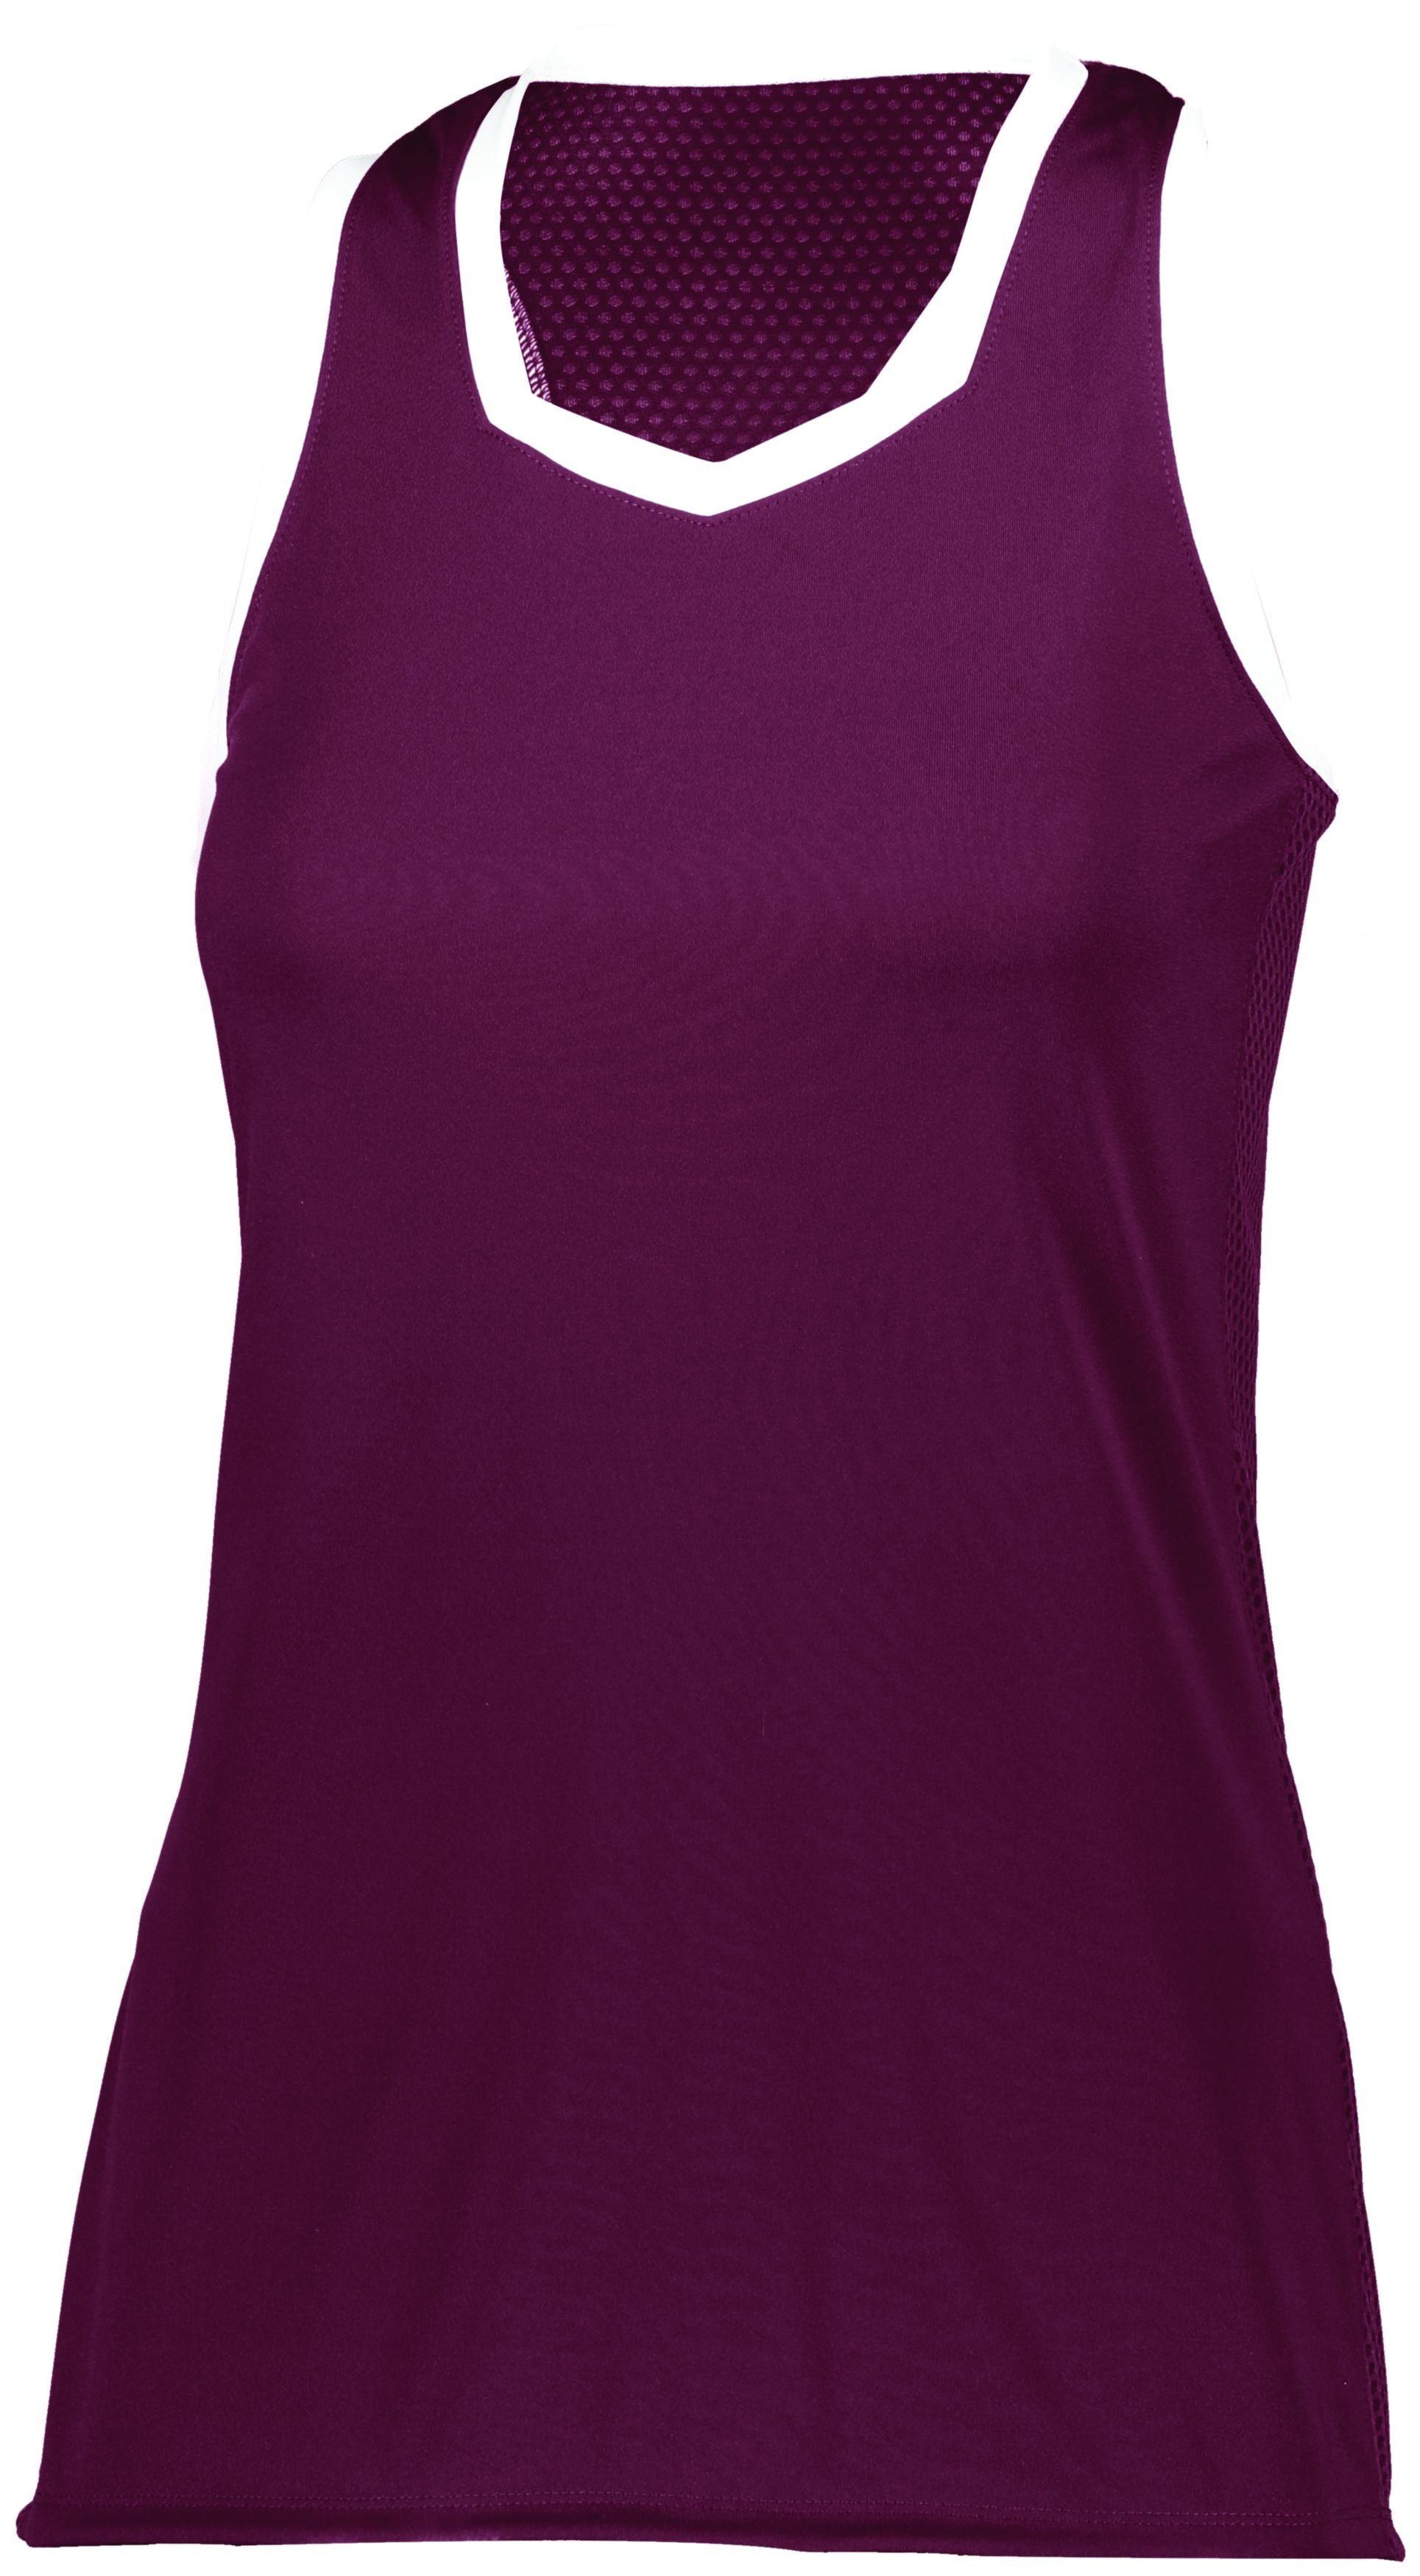 Augusta Sportswear Ladies Crosse Jersey in Maroon/White  -Part of the Ladies, Ladies-Jersey, Augusta-Products, Shirts product lines at KanaleyCreations.com